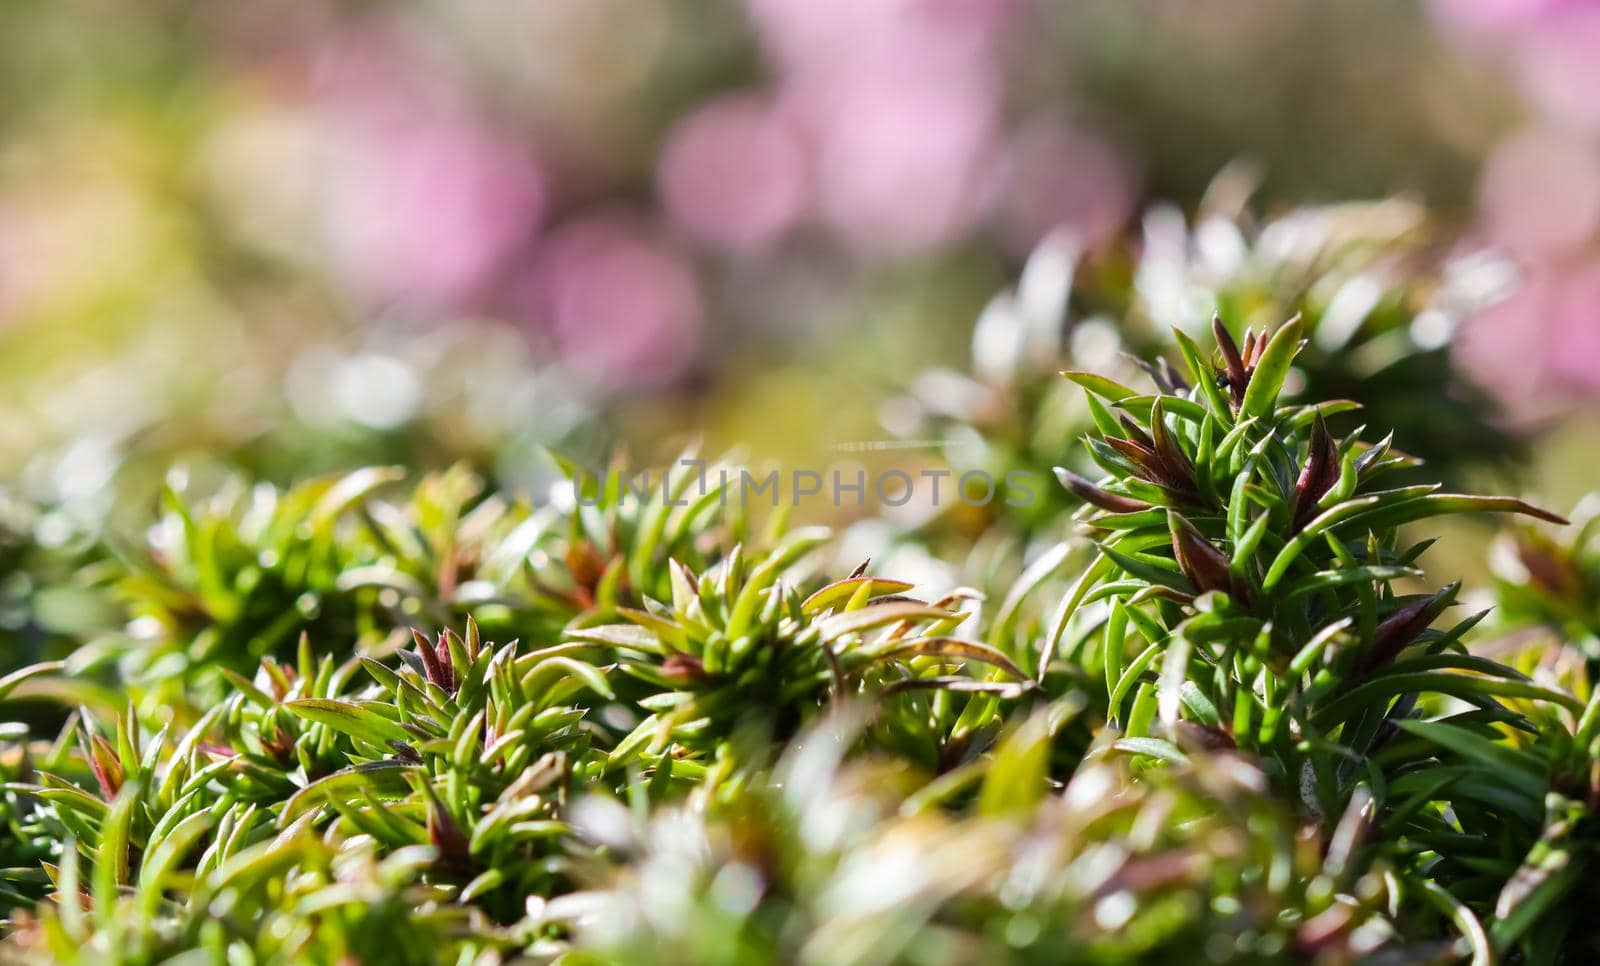 Green background of long spreading stems, foliage and buds of Creeping Phlox flowers in the garden. Nature background, botanical concept